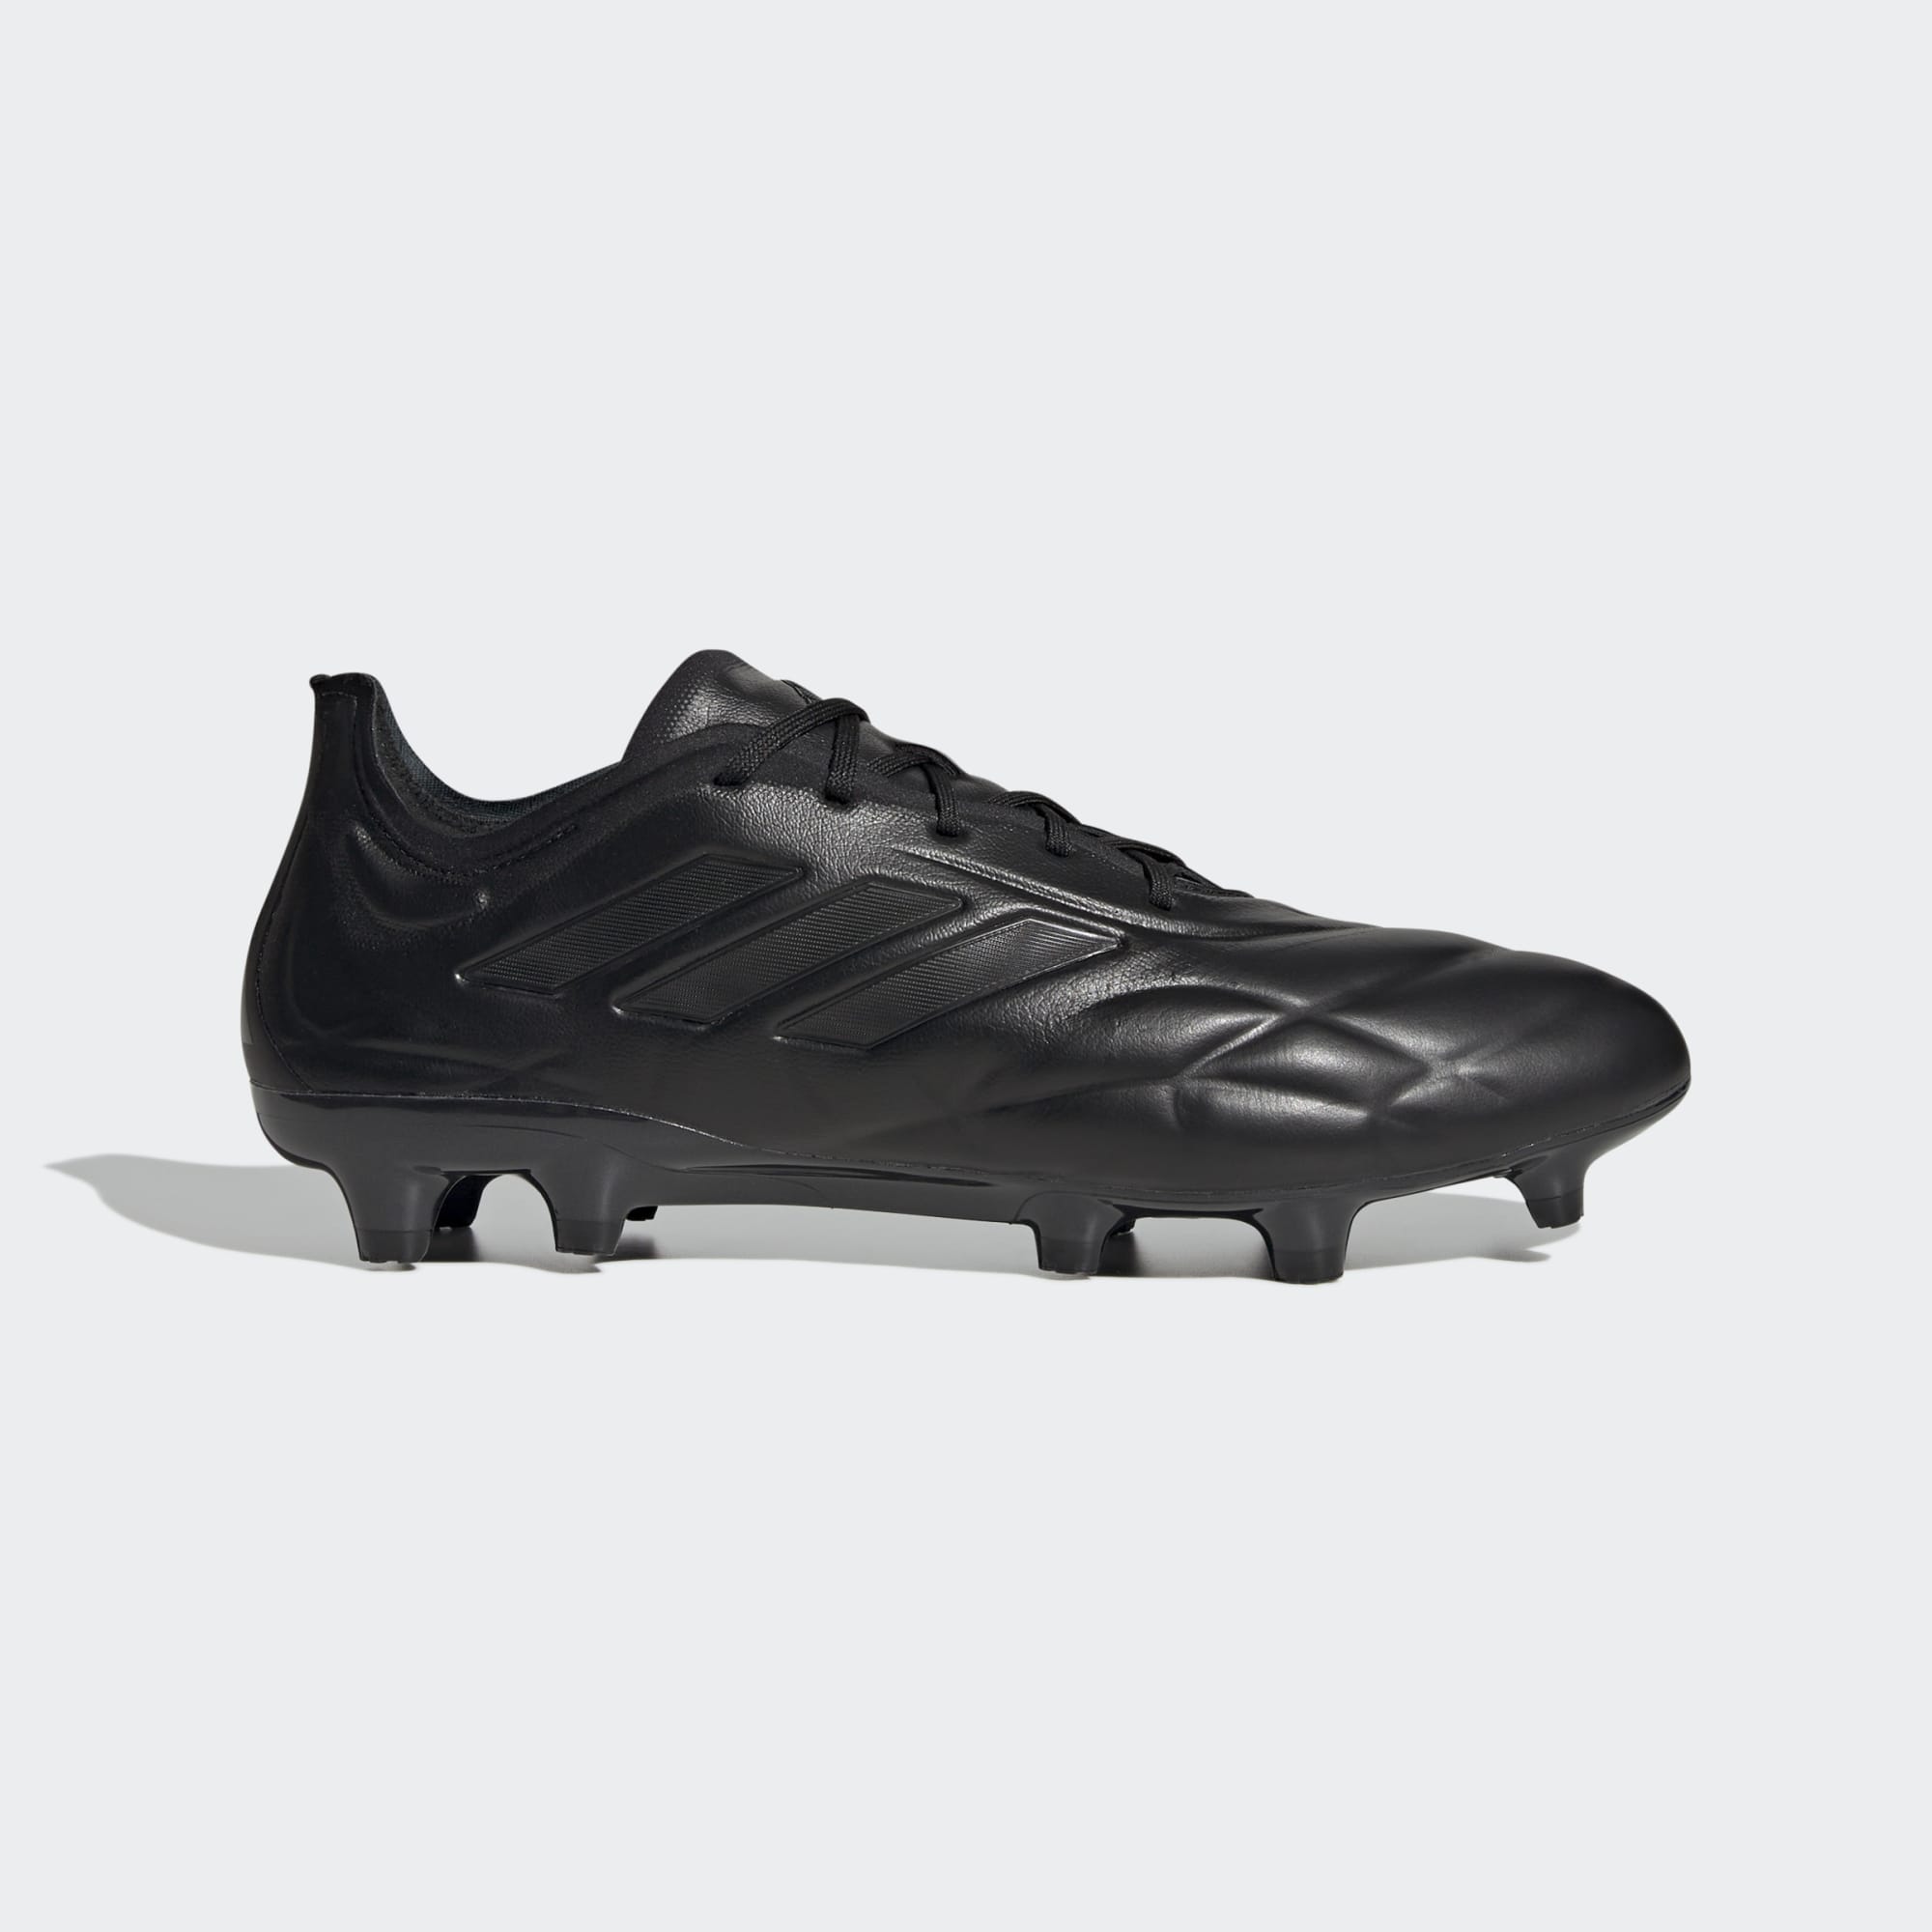 adidas COPA PURE.1 FIRM GROUND SOCCER CLEATS